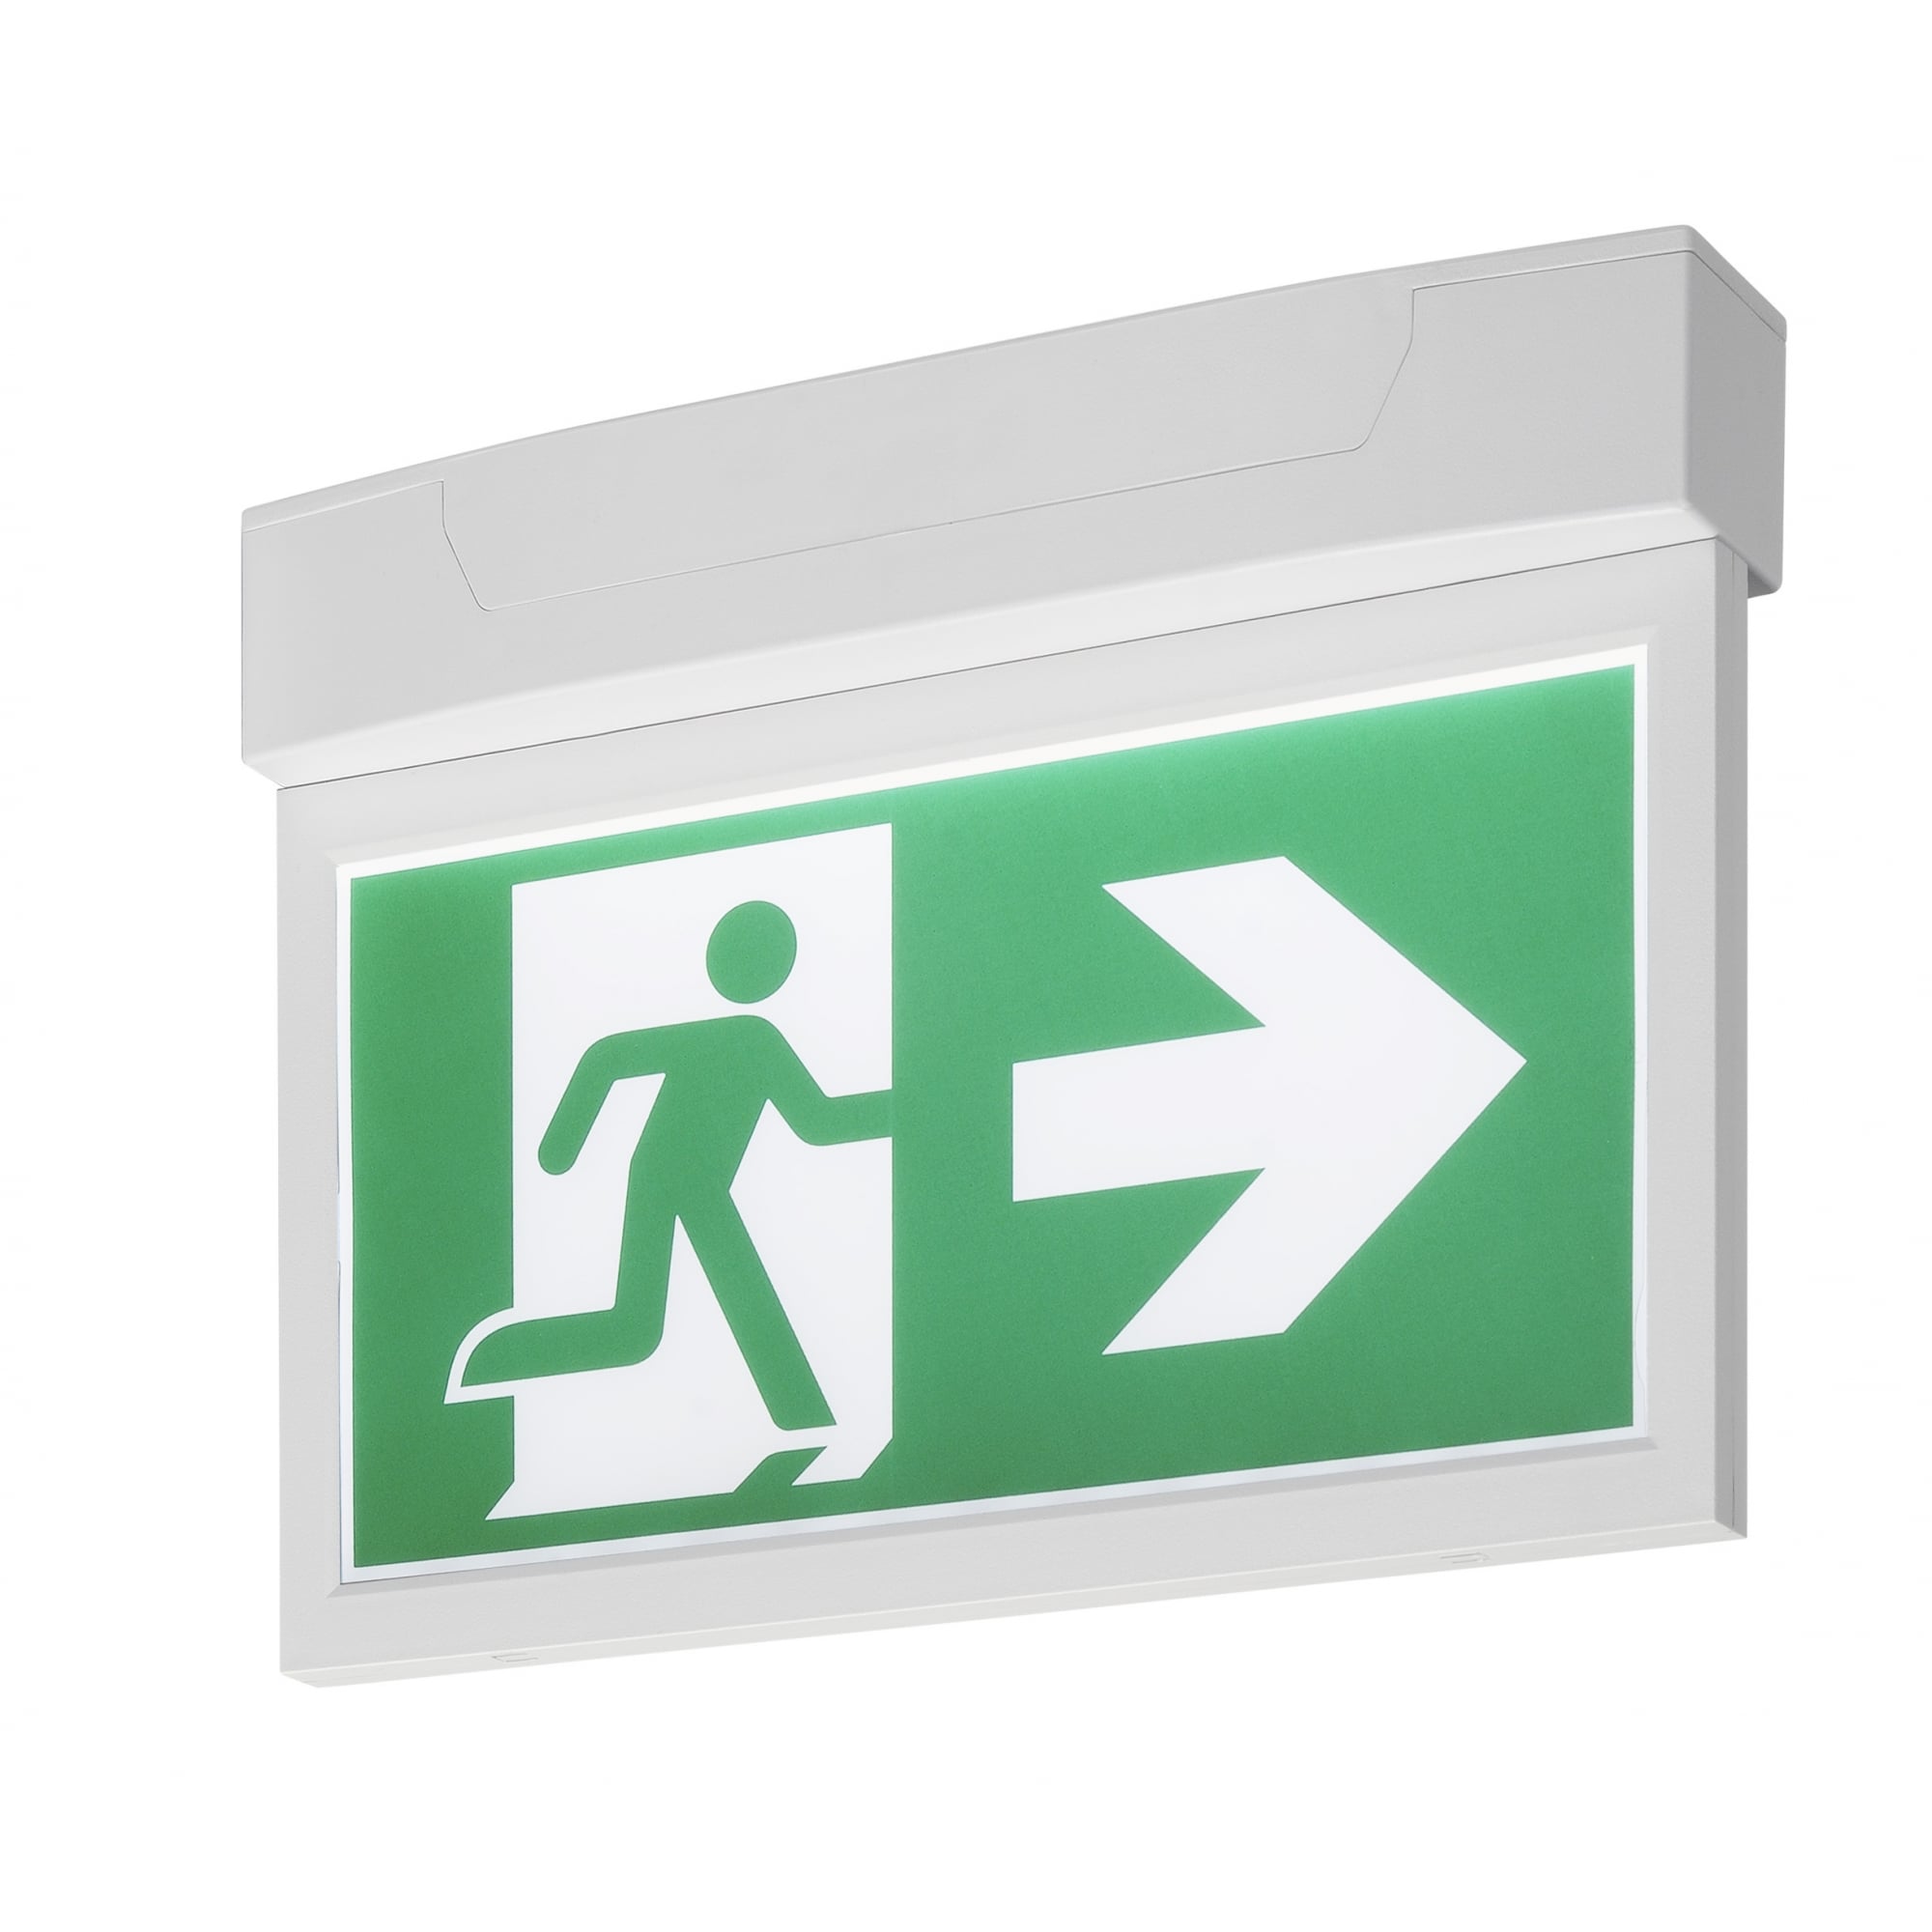 P-Light Emergency Exit Signbig Ceiling/Wall, White